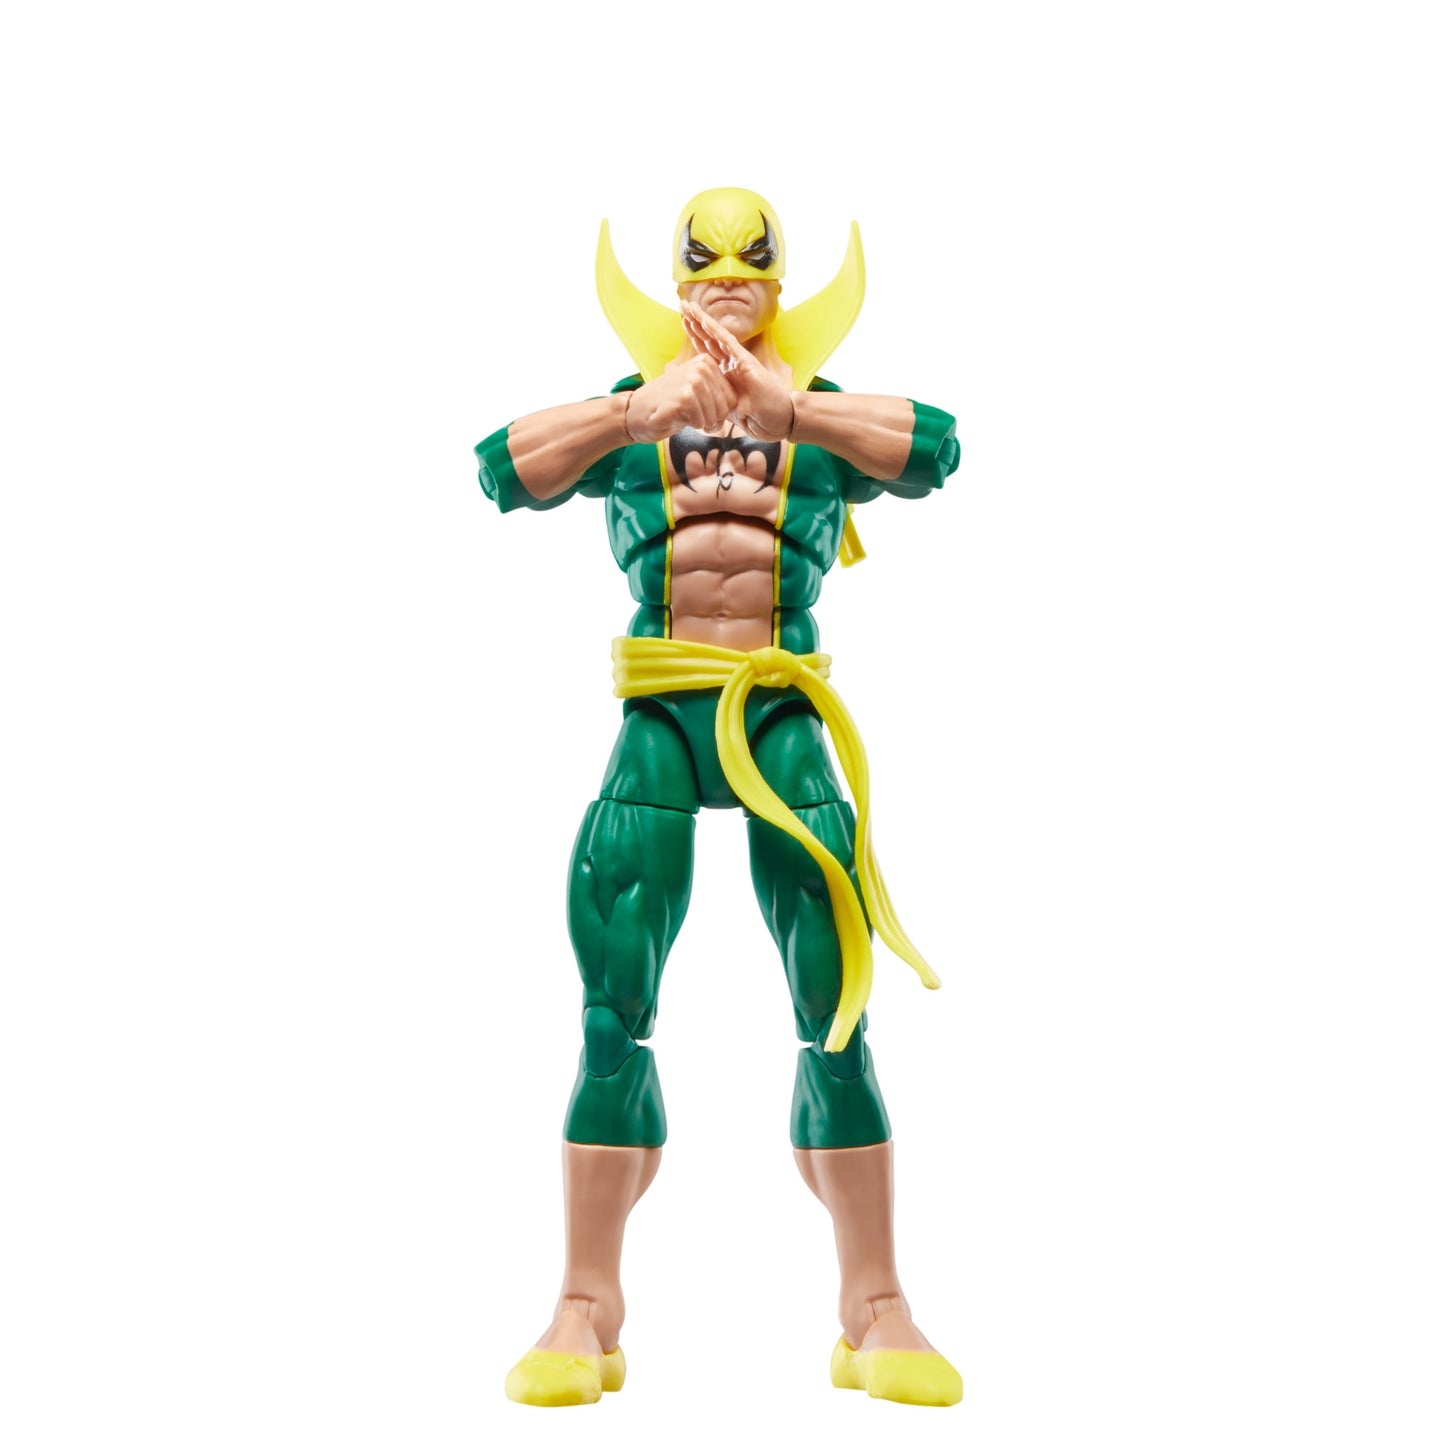 Marvel Legends Series Iron Fist and Luke Cage, Marvel 85th Anniversary Comics Collectible 6-Inch Action Figures